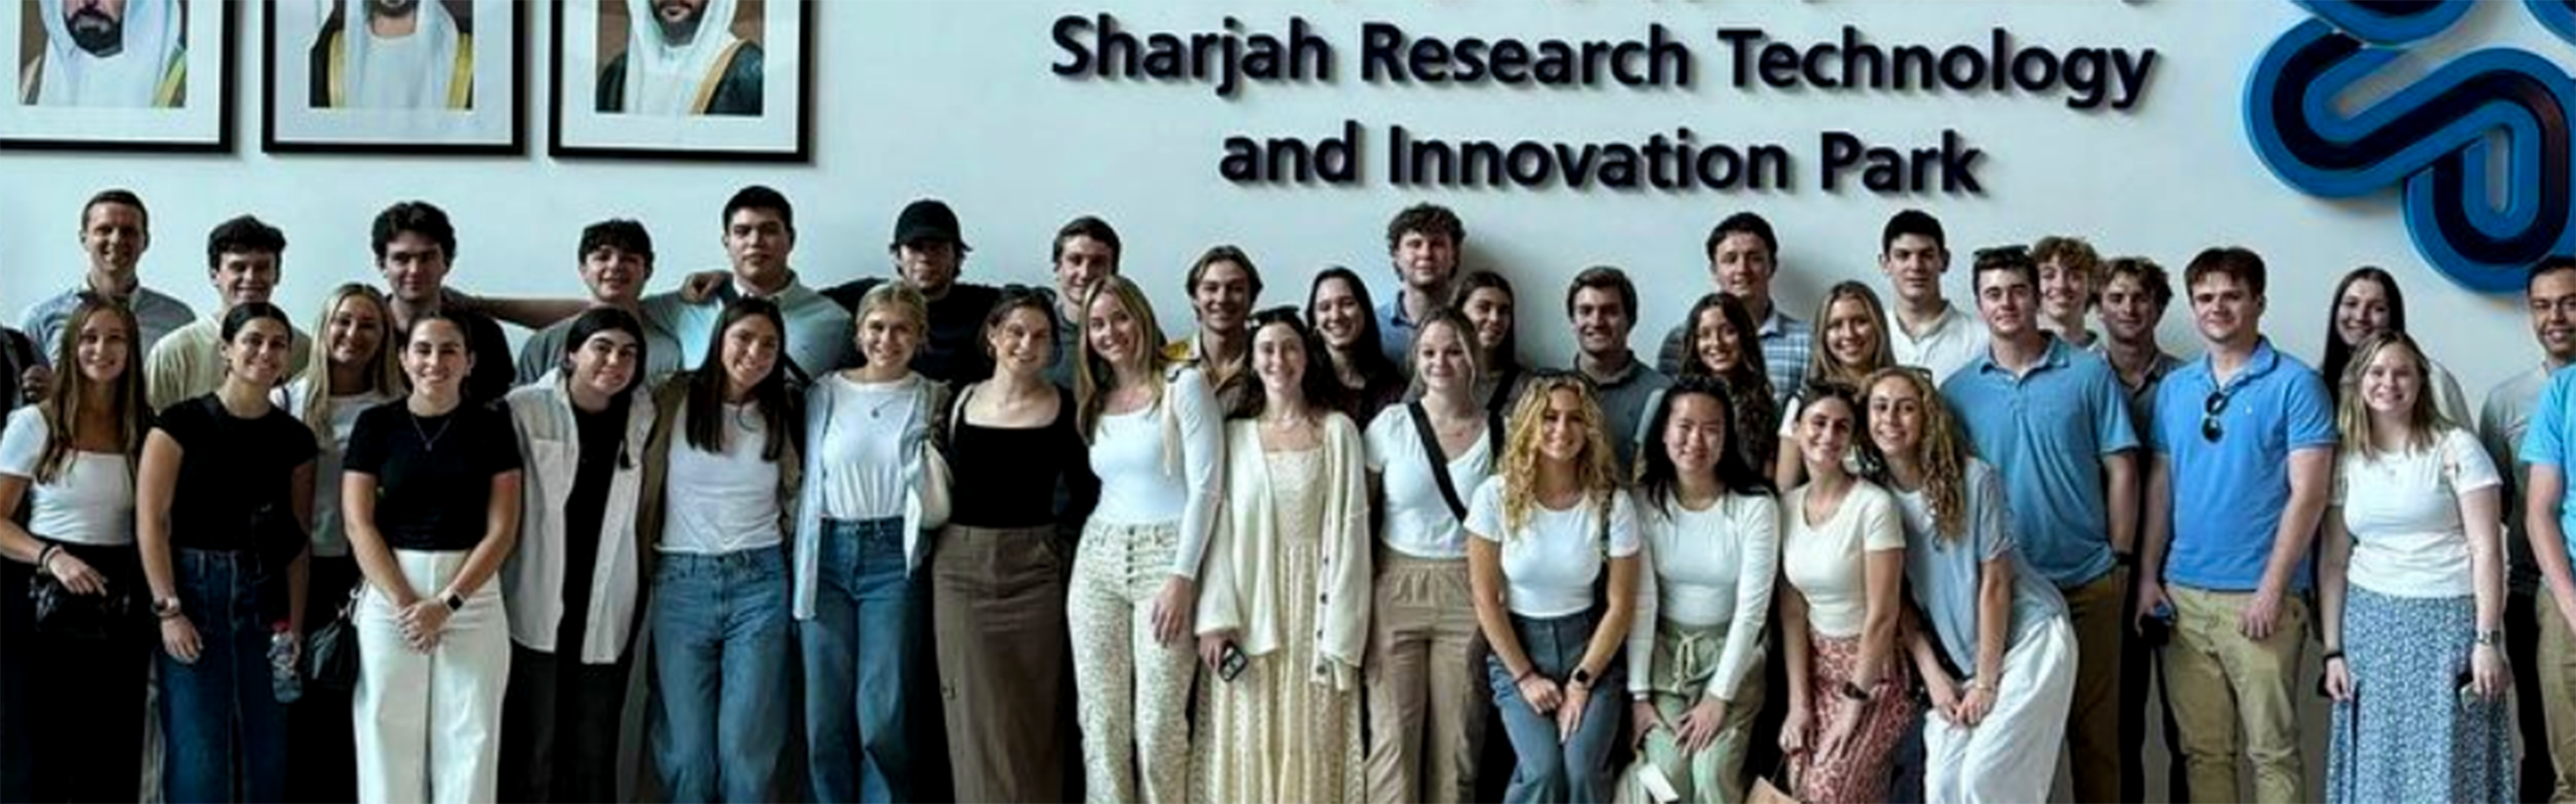 Business Fellows at Sharjah Research Technology from a great school in North Carolina